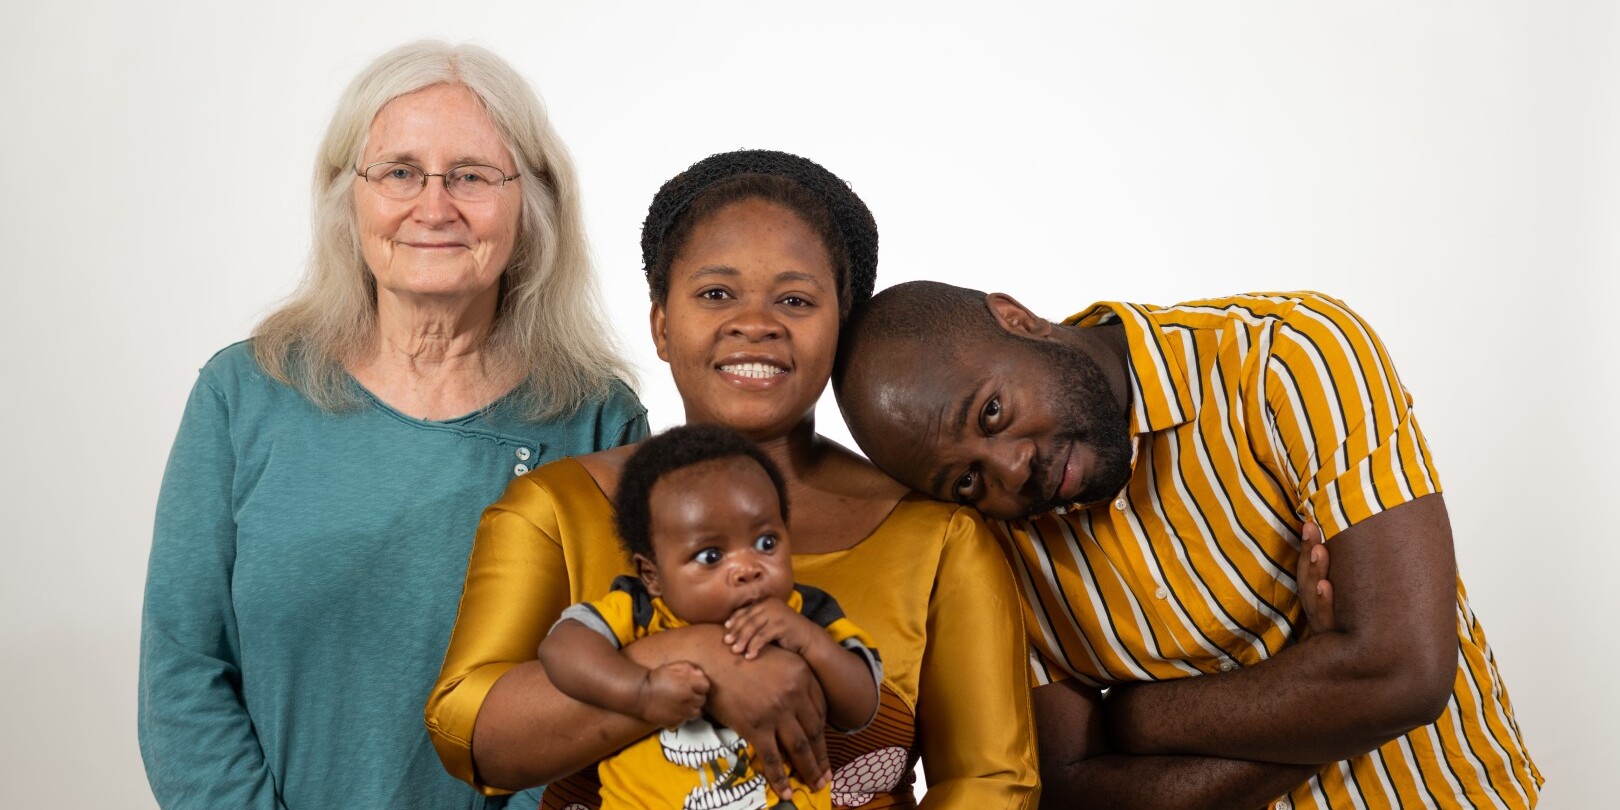 stock photo of a family with u.s citizenship after preparation